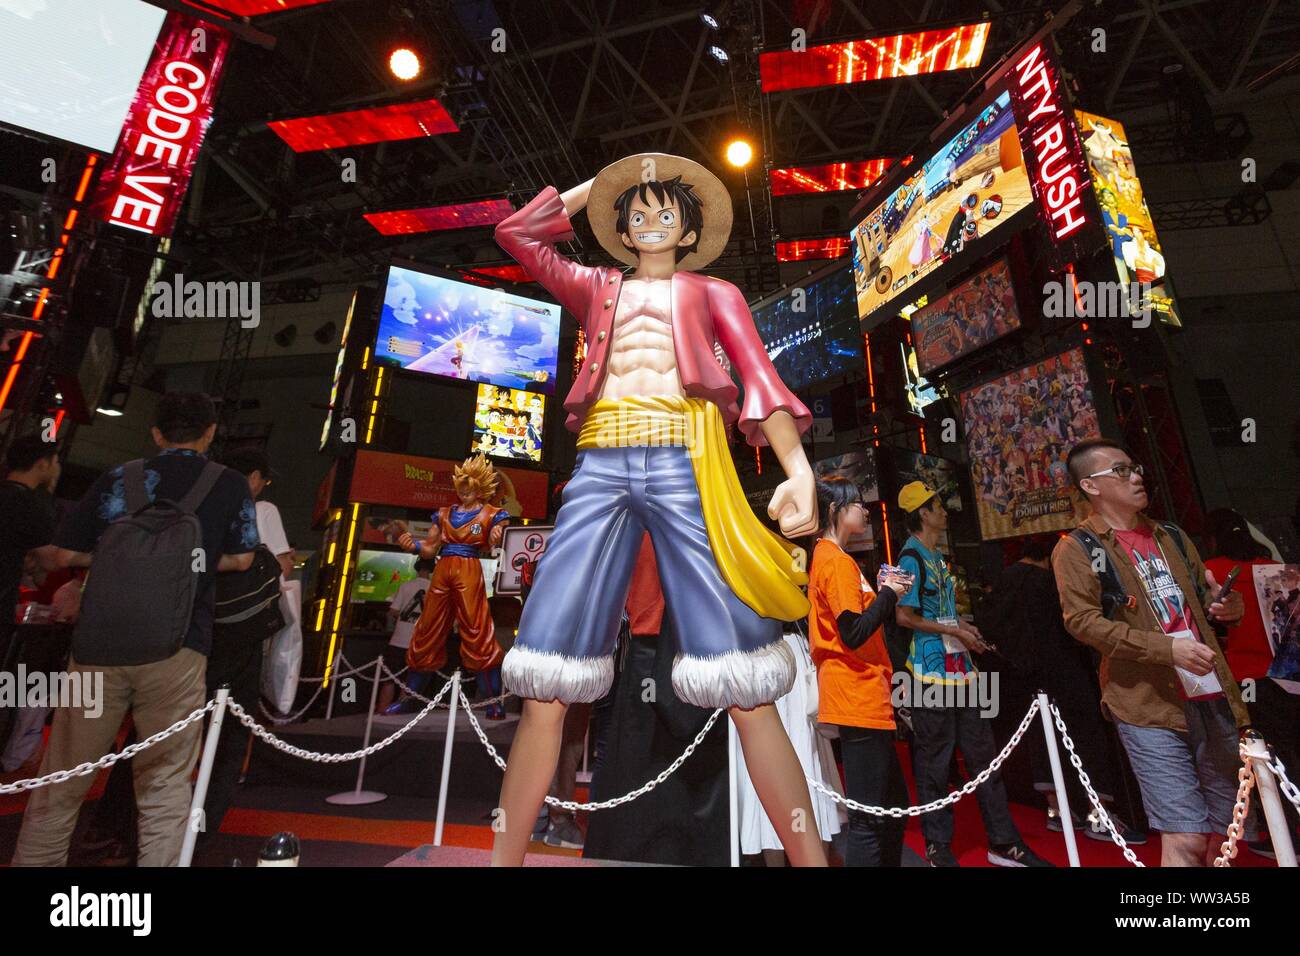 giant luffy statue